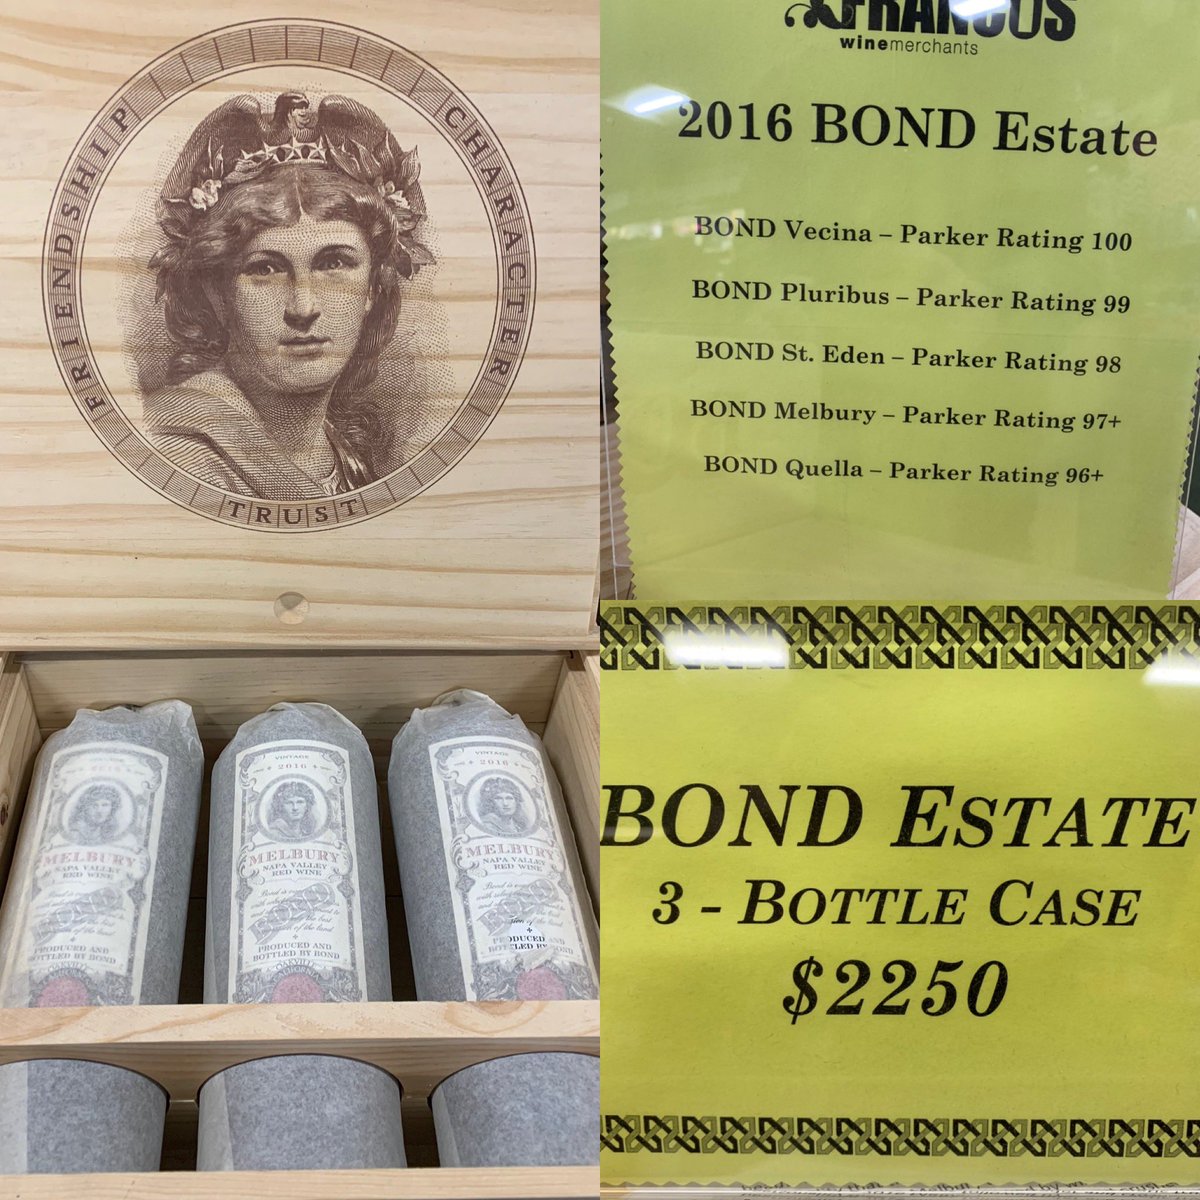 BOND Estate – Vacina, Pluribus, St. Eden, Melbury, Quella – the perfect gift for the Wine Collector on your gift list.
3 –Bottle Wooden presentation case $2250

#NapaValley #Napa #Bond #BondEstate #Harlan  #Holiday Gifts #CabernetSauvignon